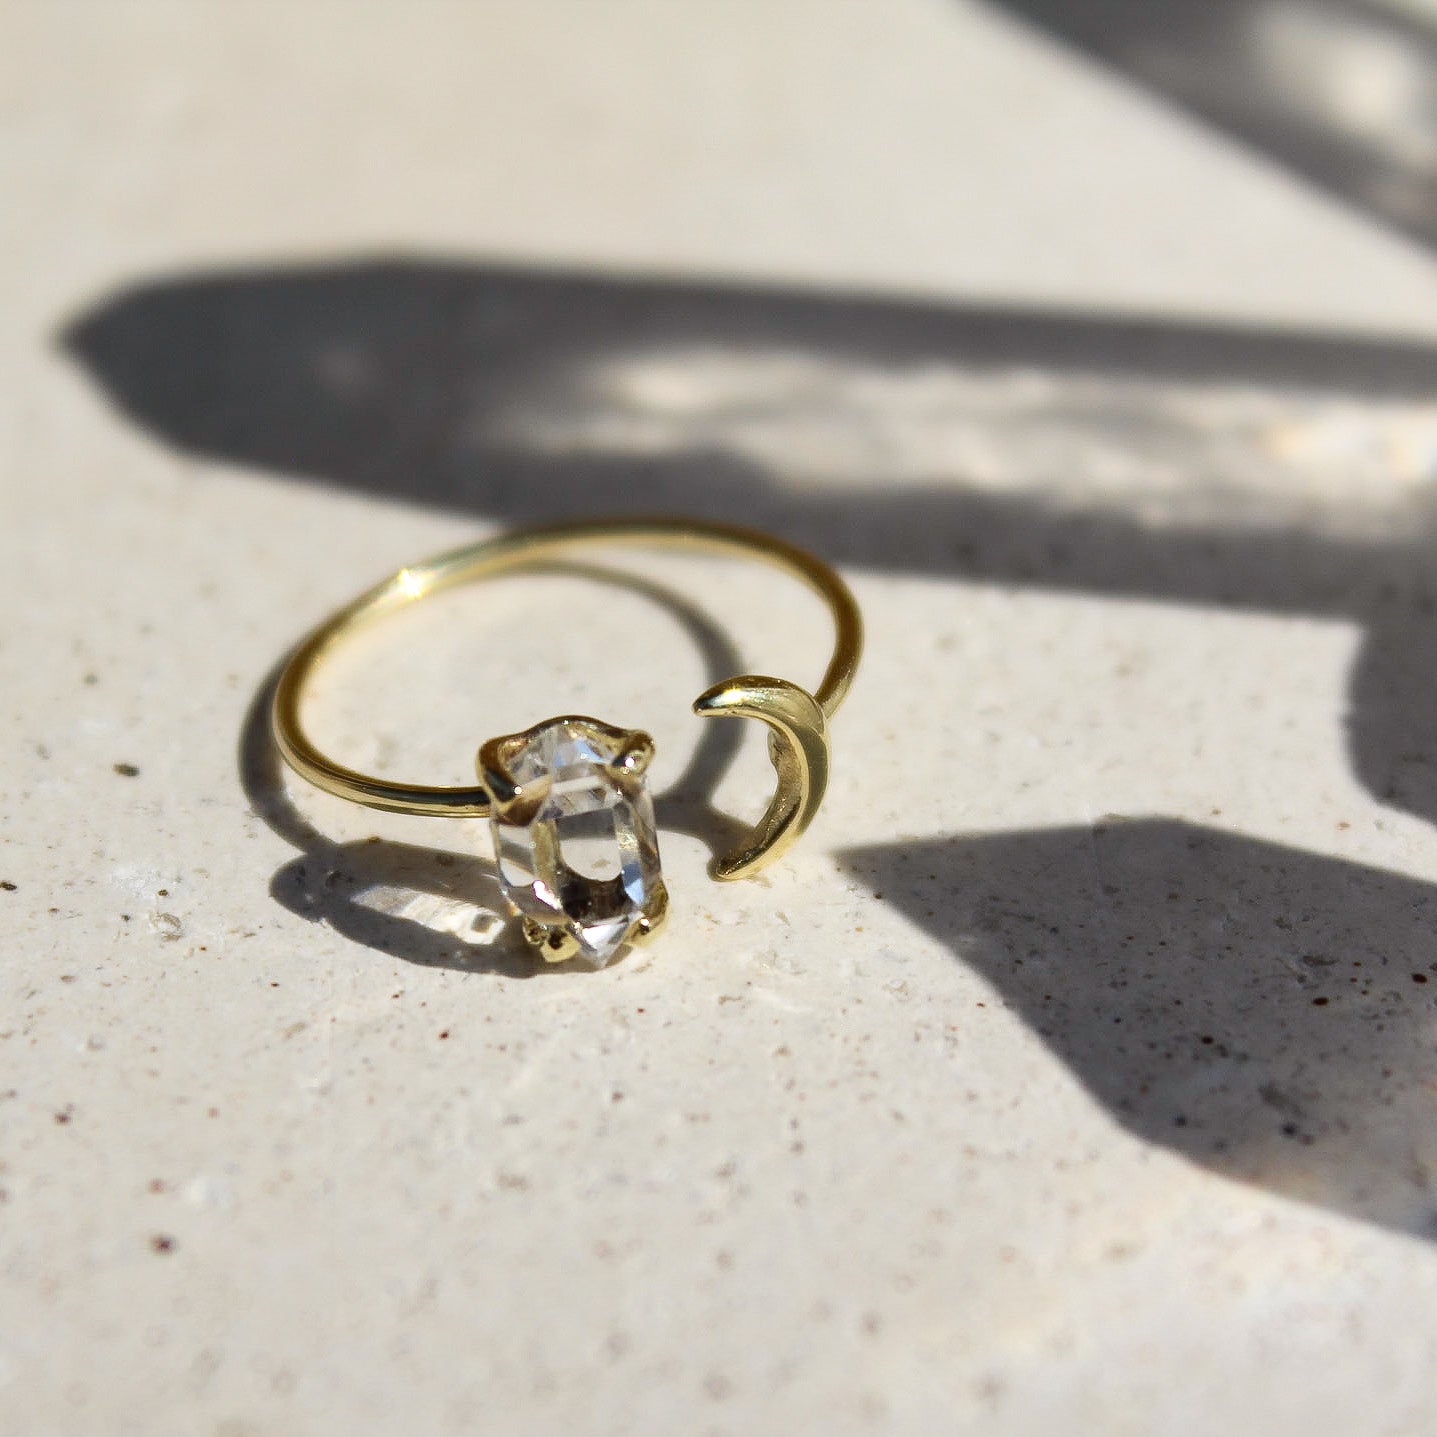 HALF MOON THIN RING - HERKIMER (SOLID GOLD 18K)